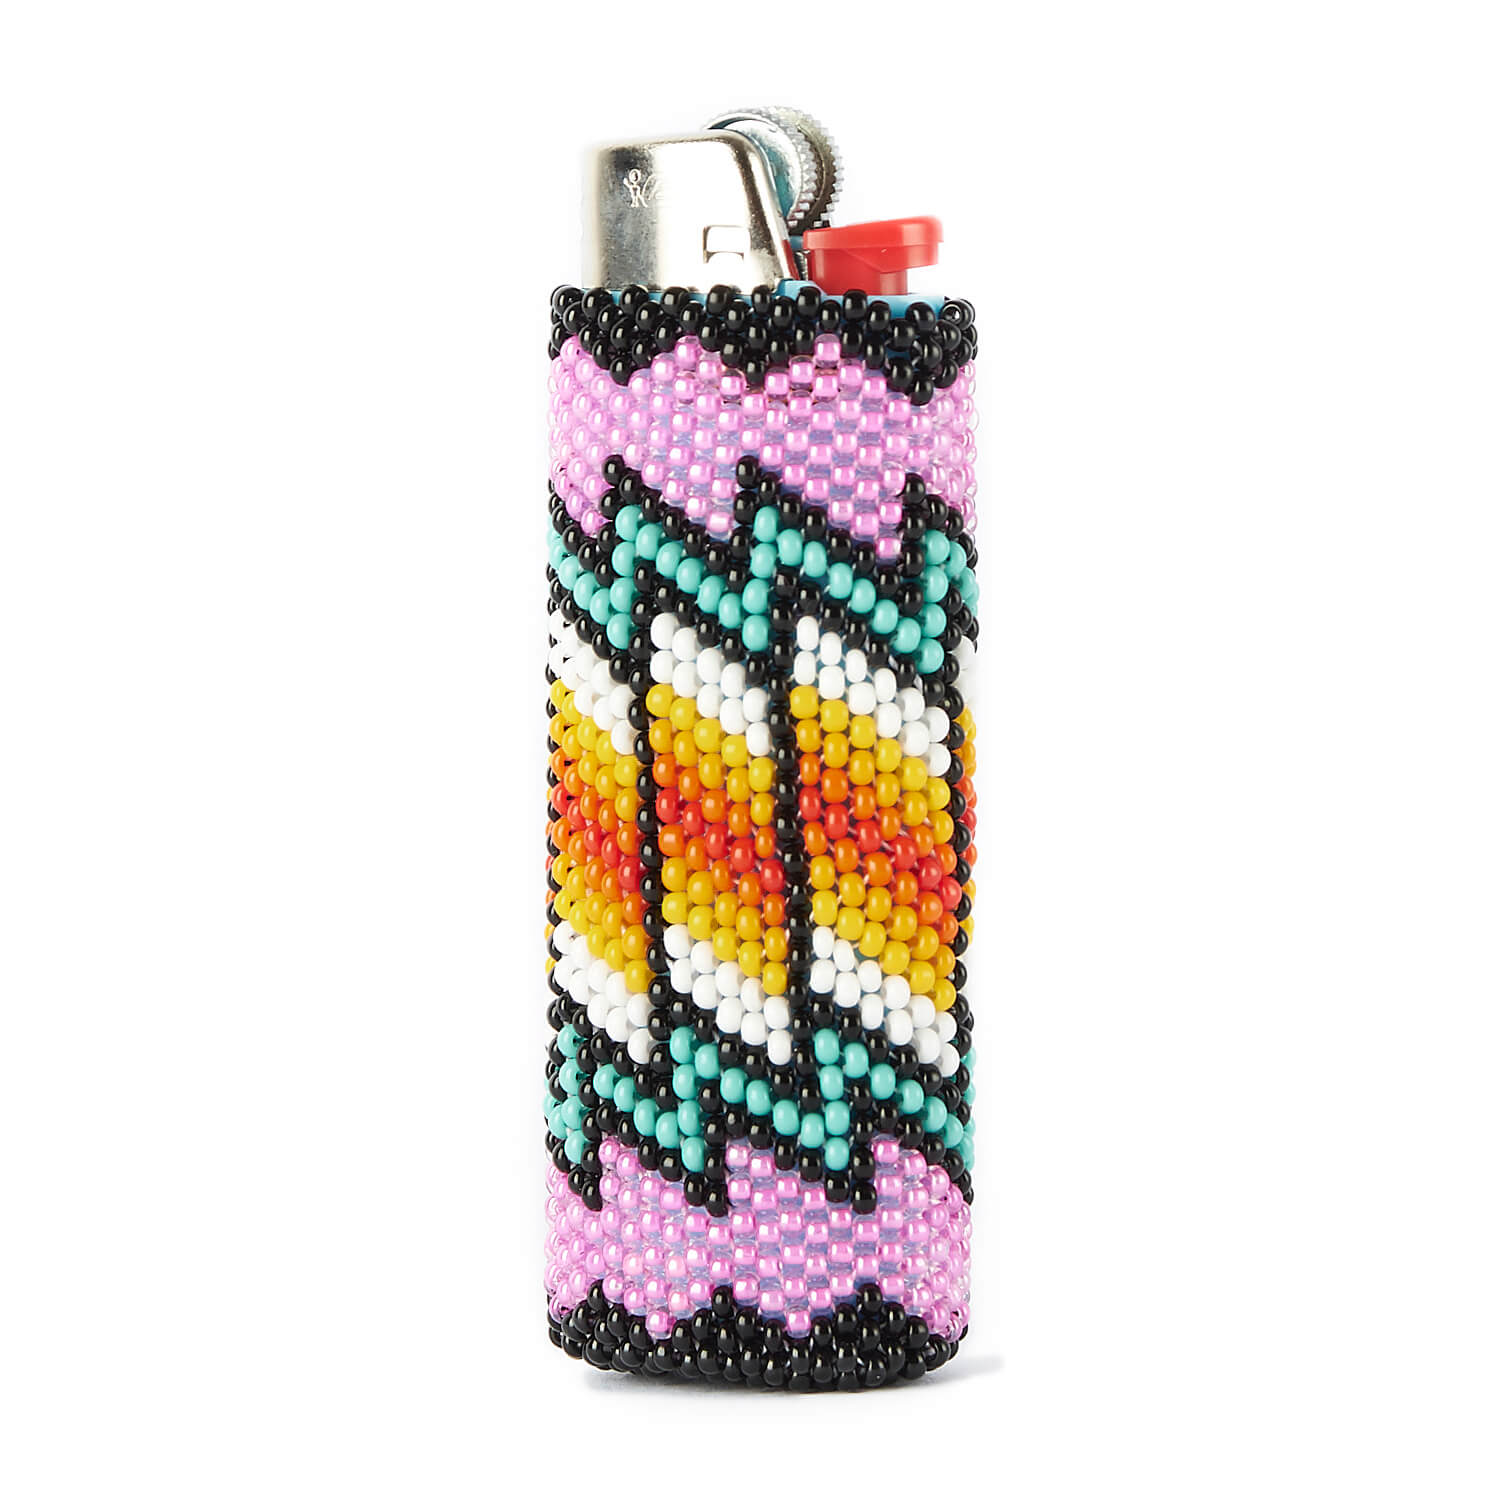 Double Bubble Beaded Lighter Case Sleeve Accessory by Mother Sierra